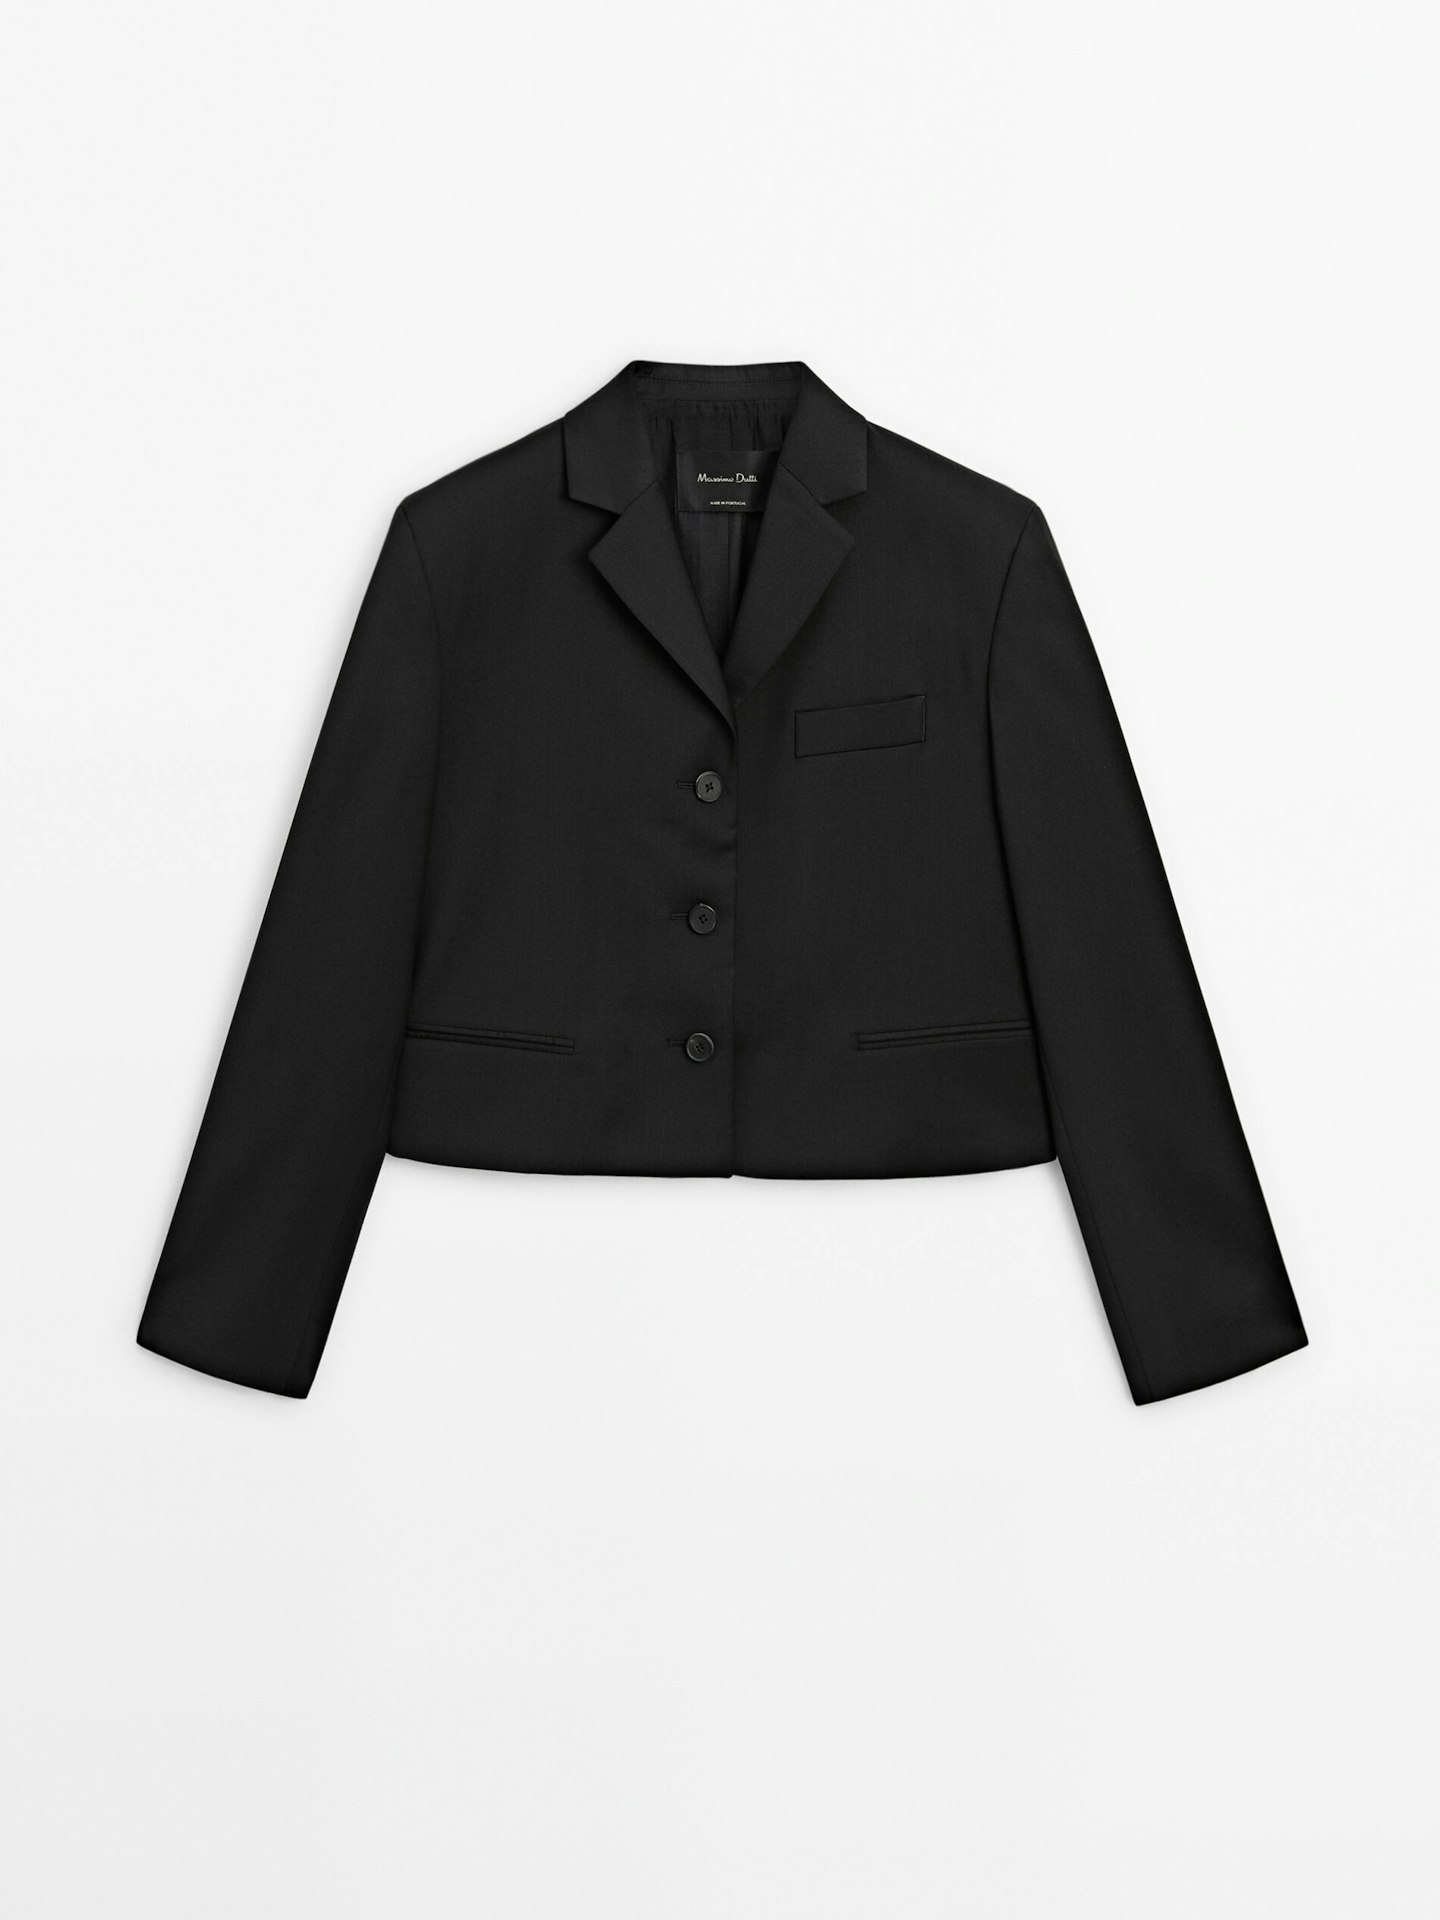 Massimo Dutti, Black Cropped Blazer With Buttons